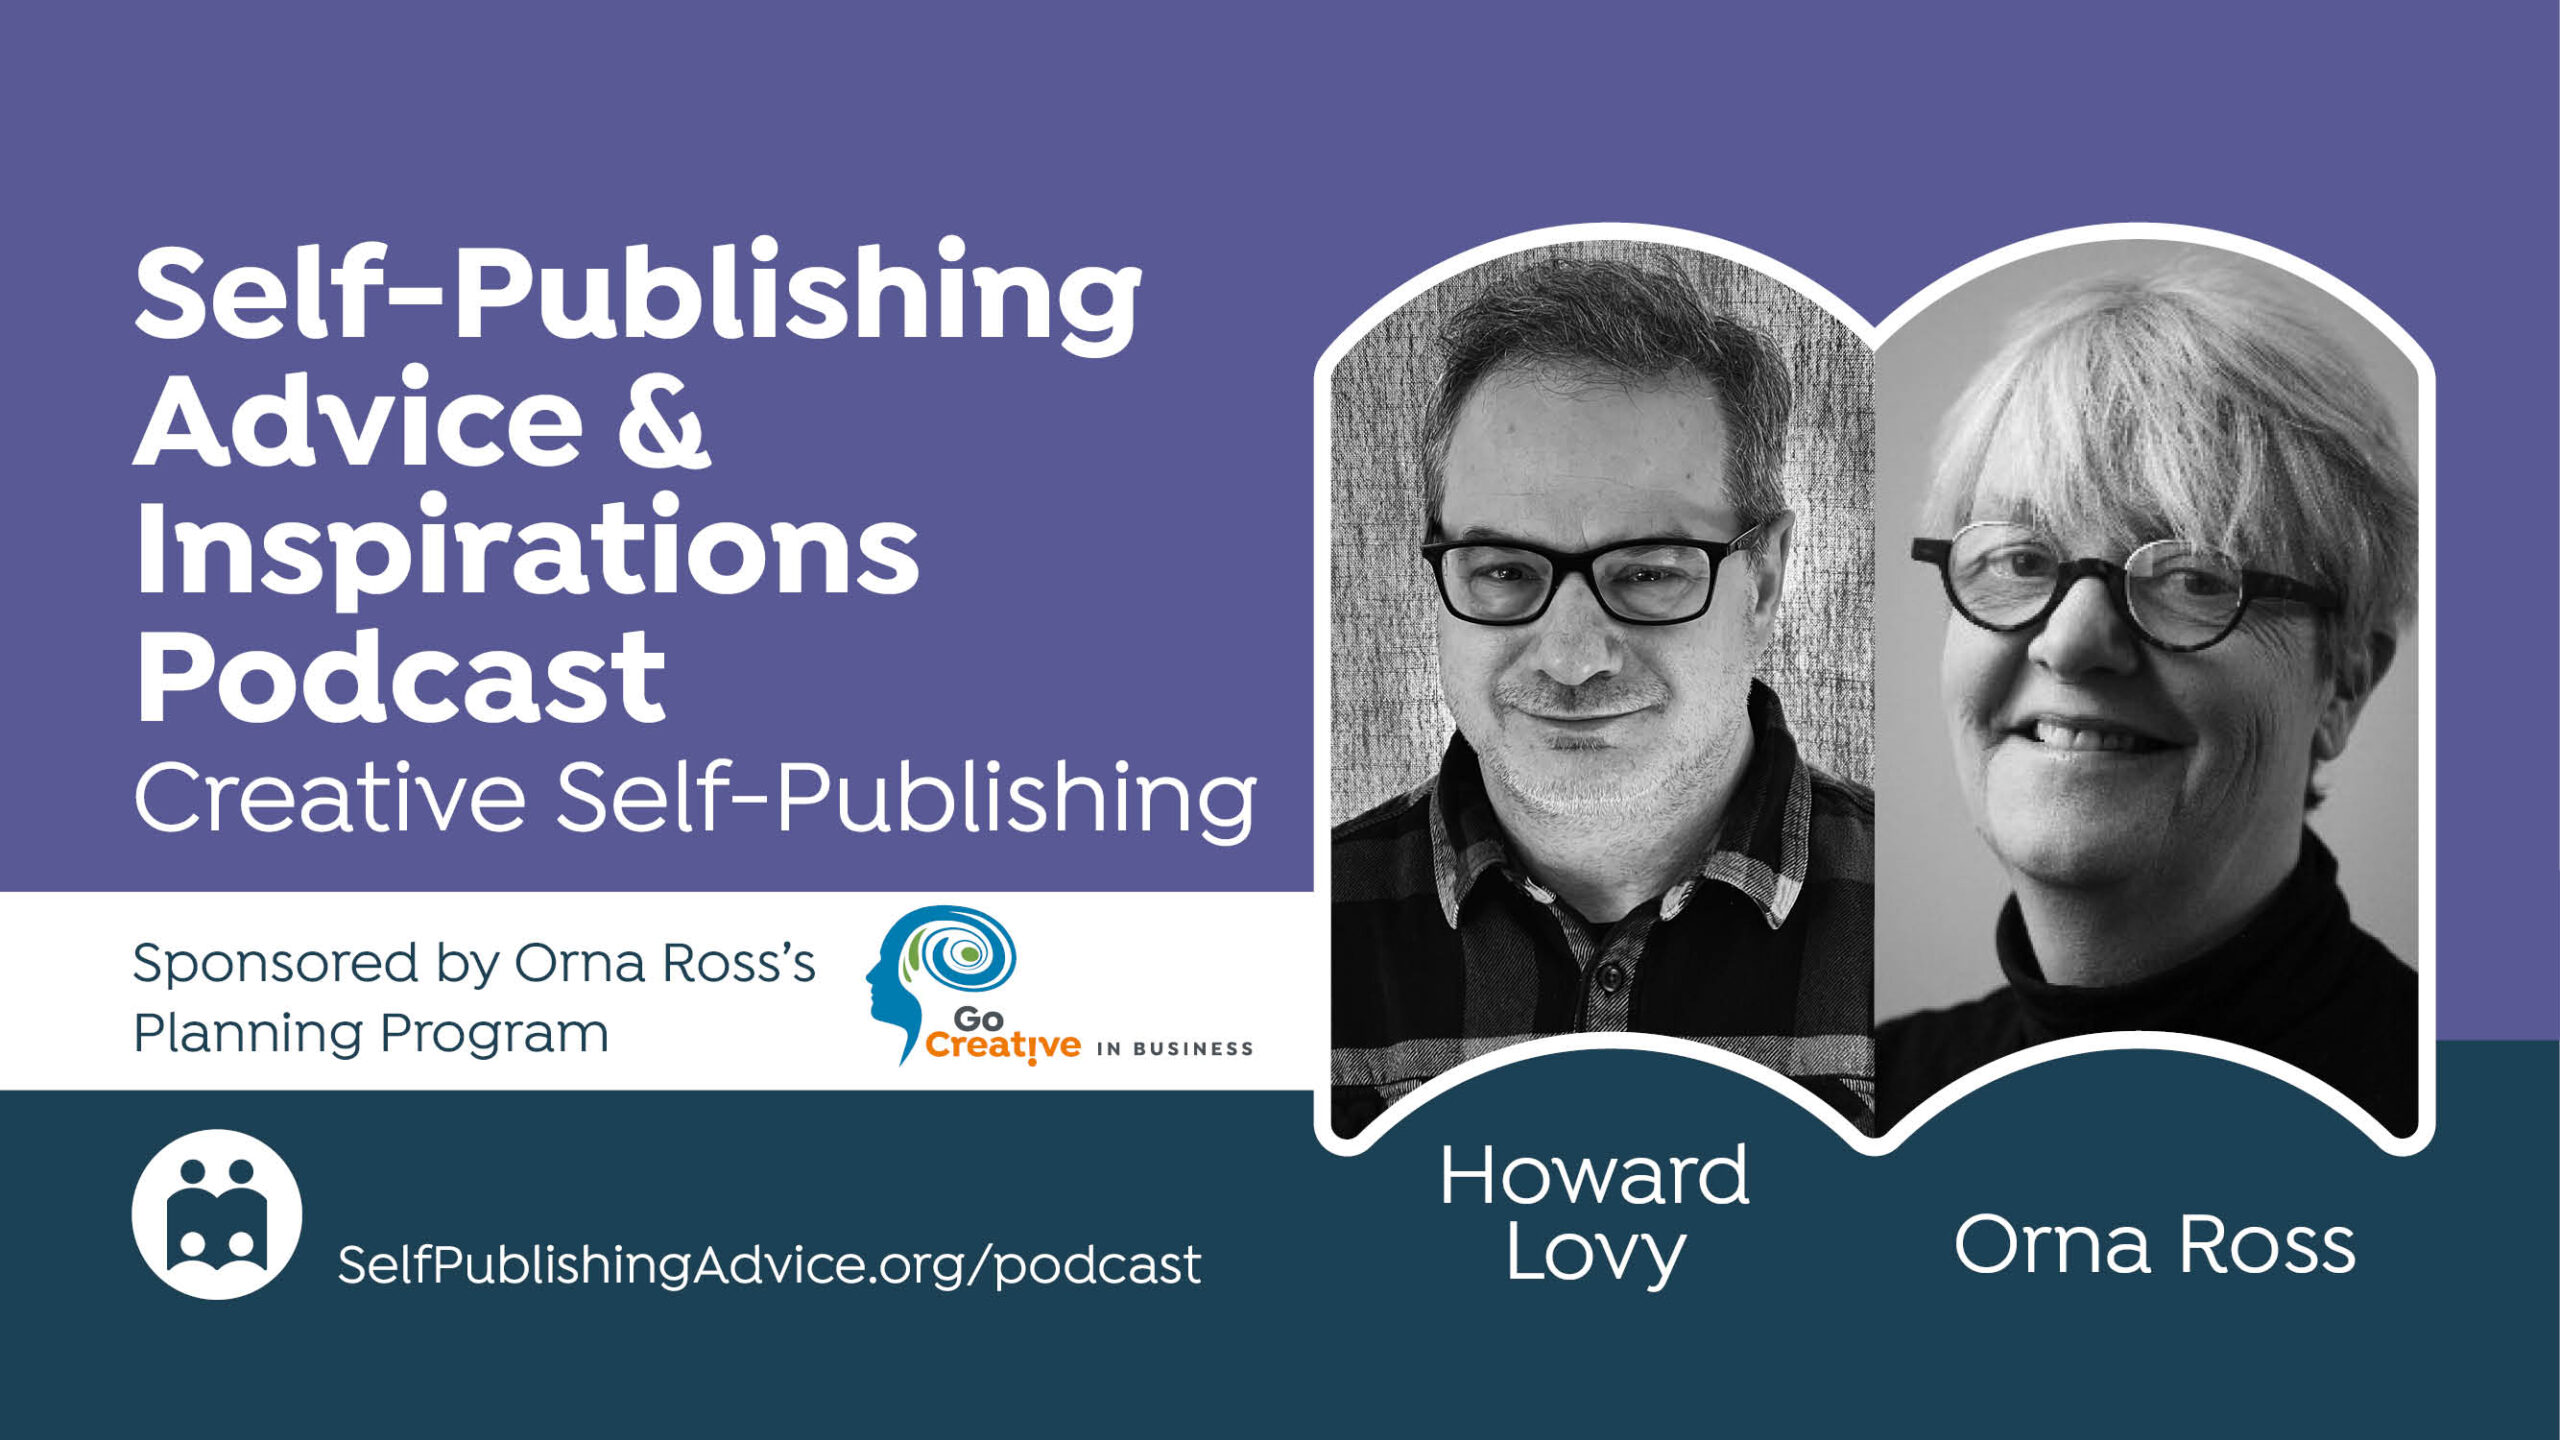 How To Restart Your Creative Flow: Creative Self-Publishing Podcast With Orna Ross And Howard Lovy